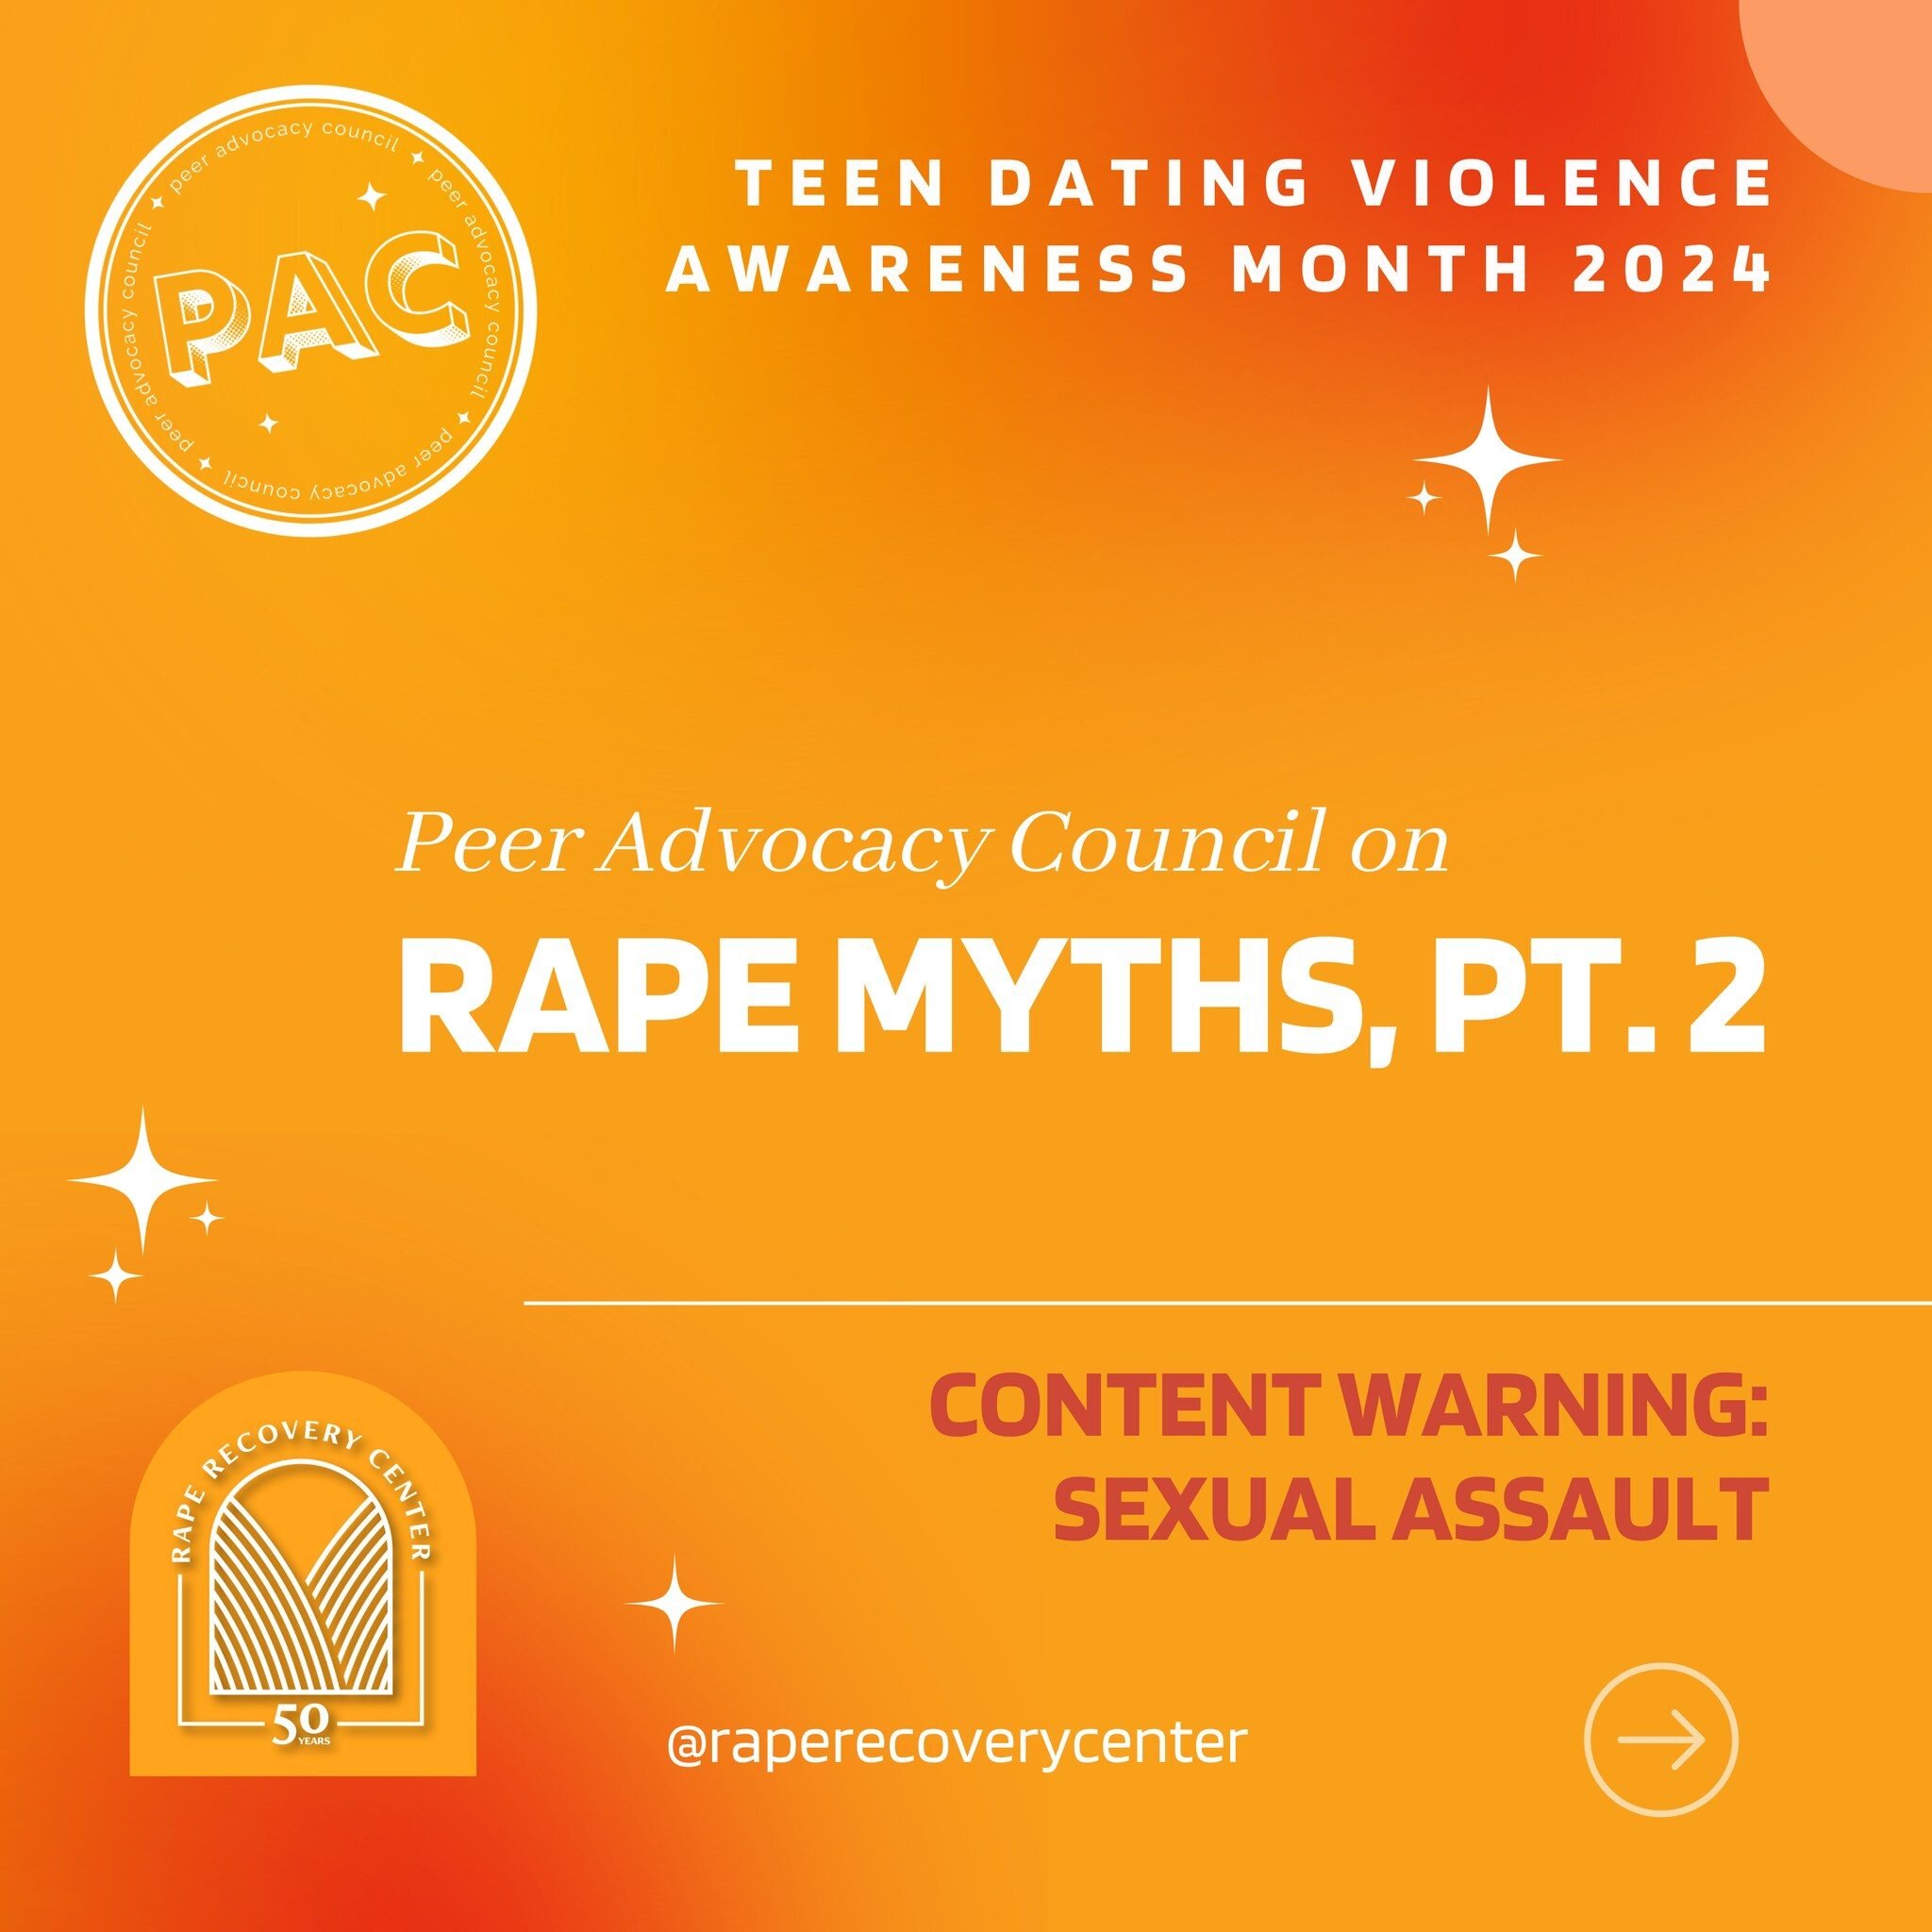 ❗Content Warning: Sexual Assault.❗

The &ldquo;boys will be boys&rdquo; myth is the idea that boys and men are naturally aggressive and that sexual violence and harassment are harmless masculine behaviors. This myth trivializes sexual assault and ena